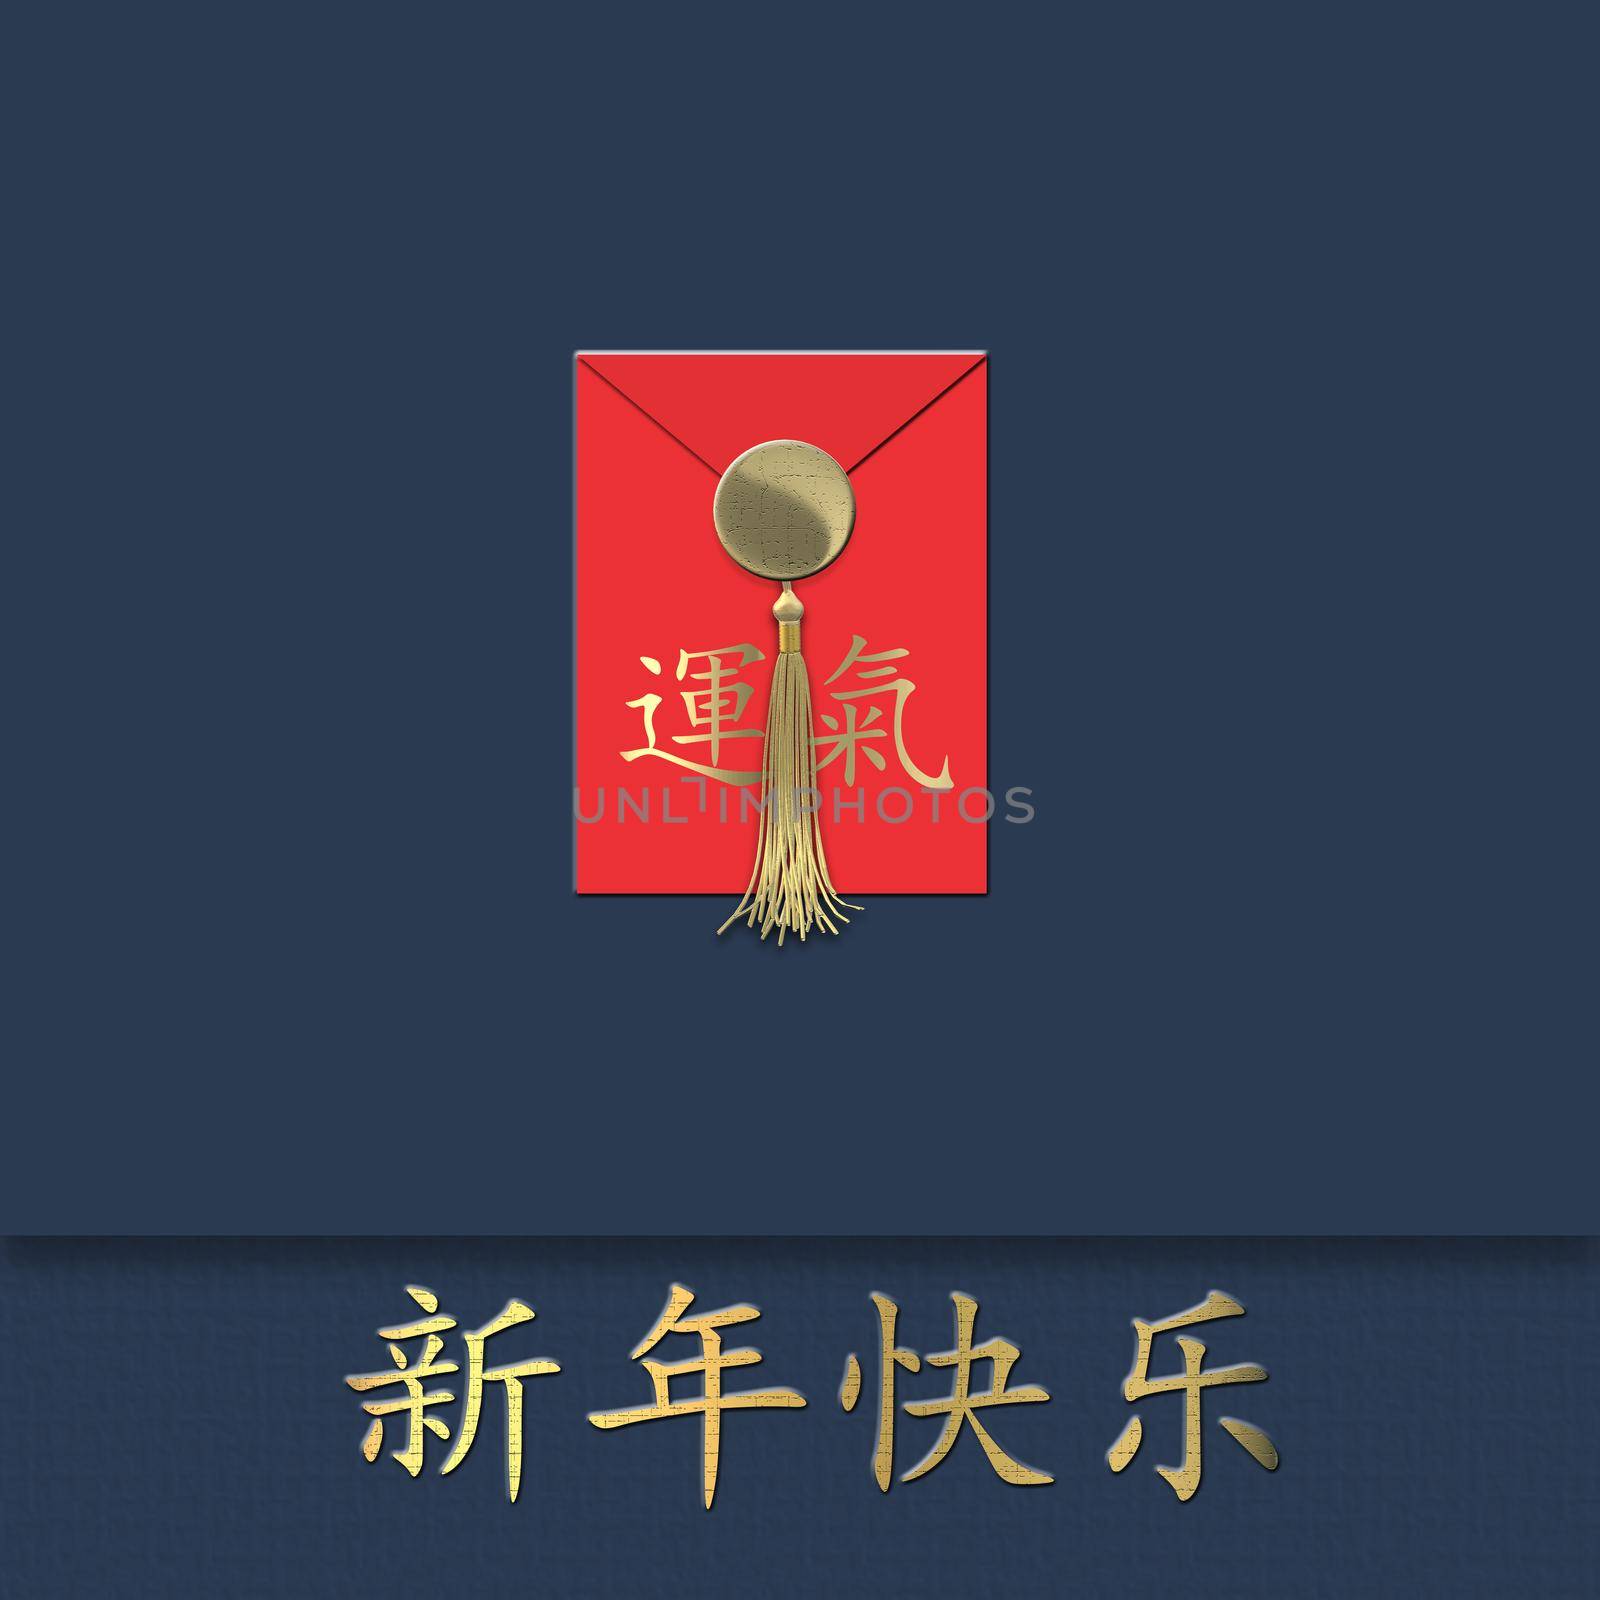 Chinese New Year lucky envelope over blue. Red Chinese lucky envelope with text Chinese translation Luck. Gold text Chinese translation Happy New Year. Asian lucky card. 3D illustration